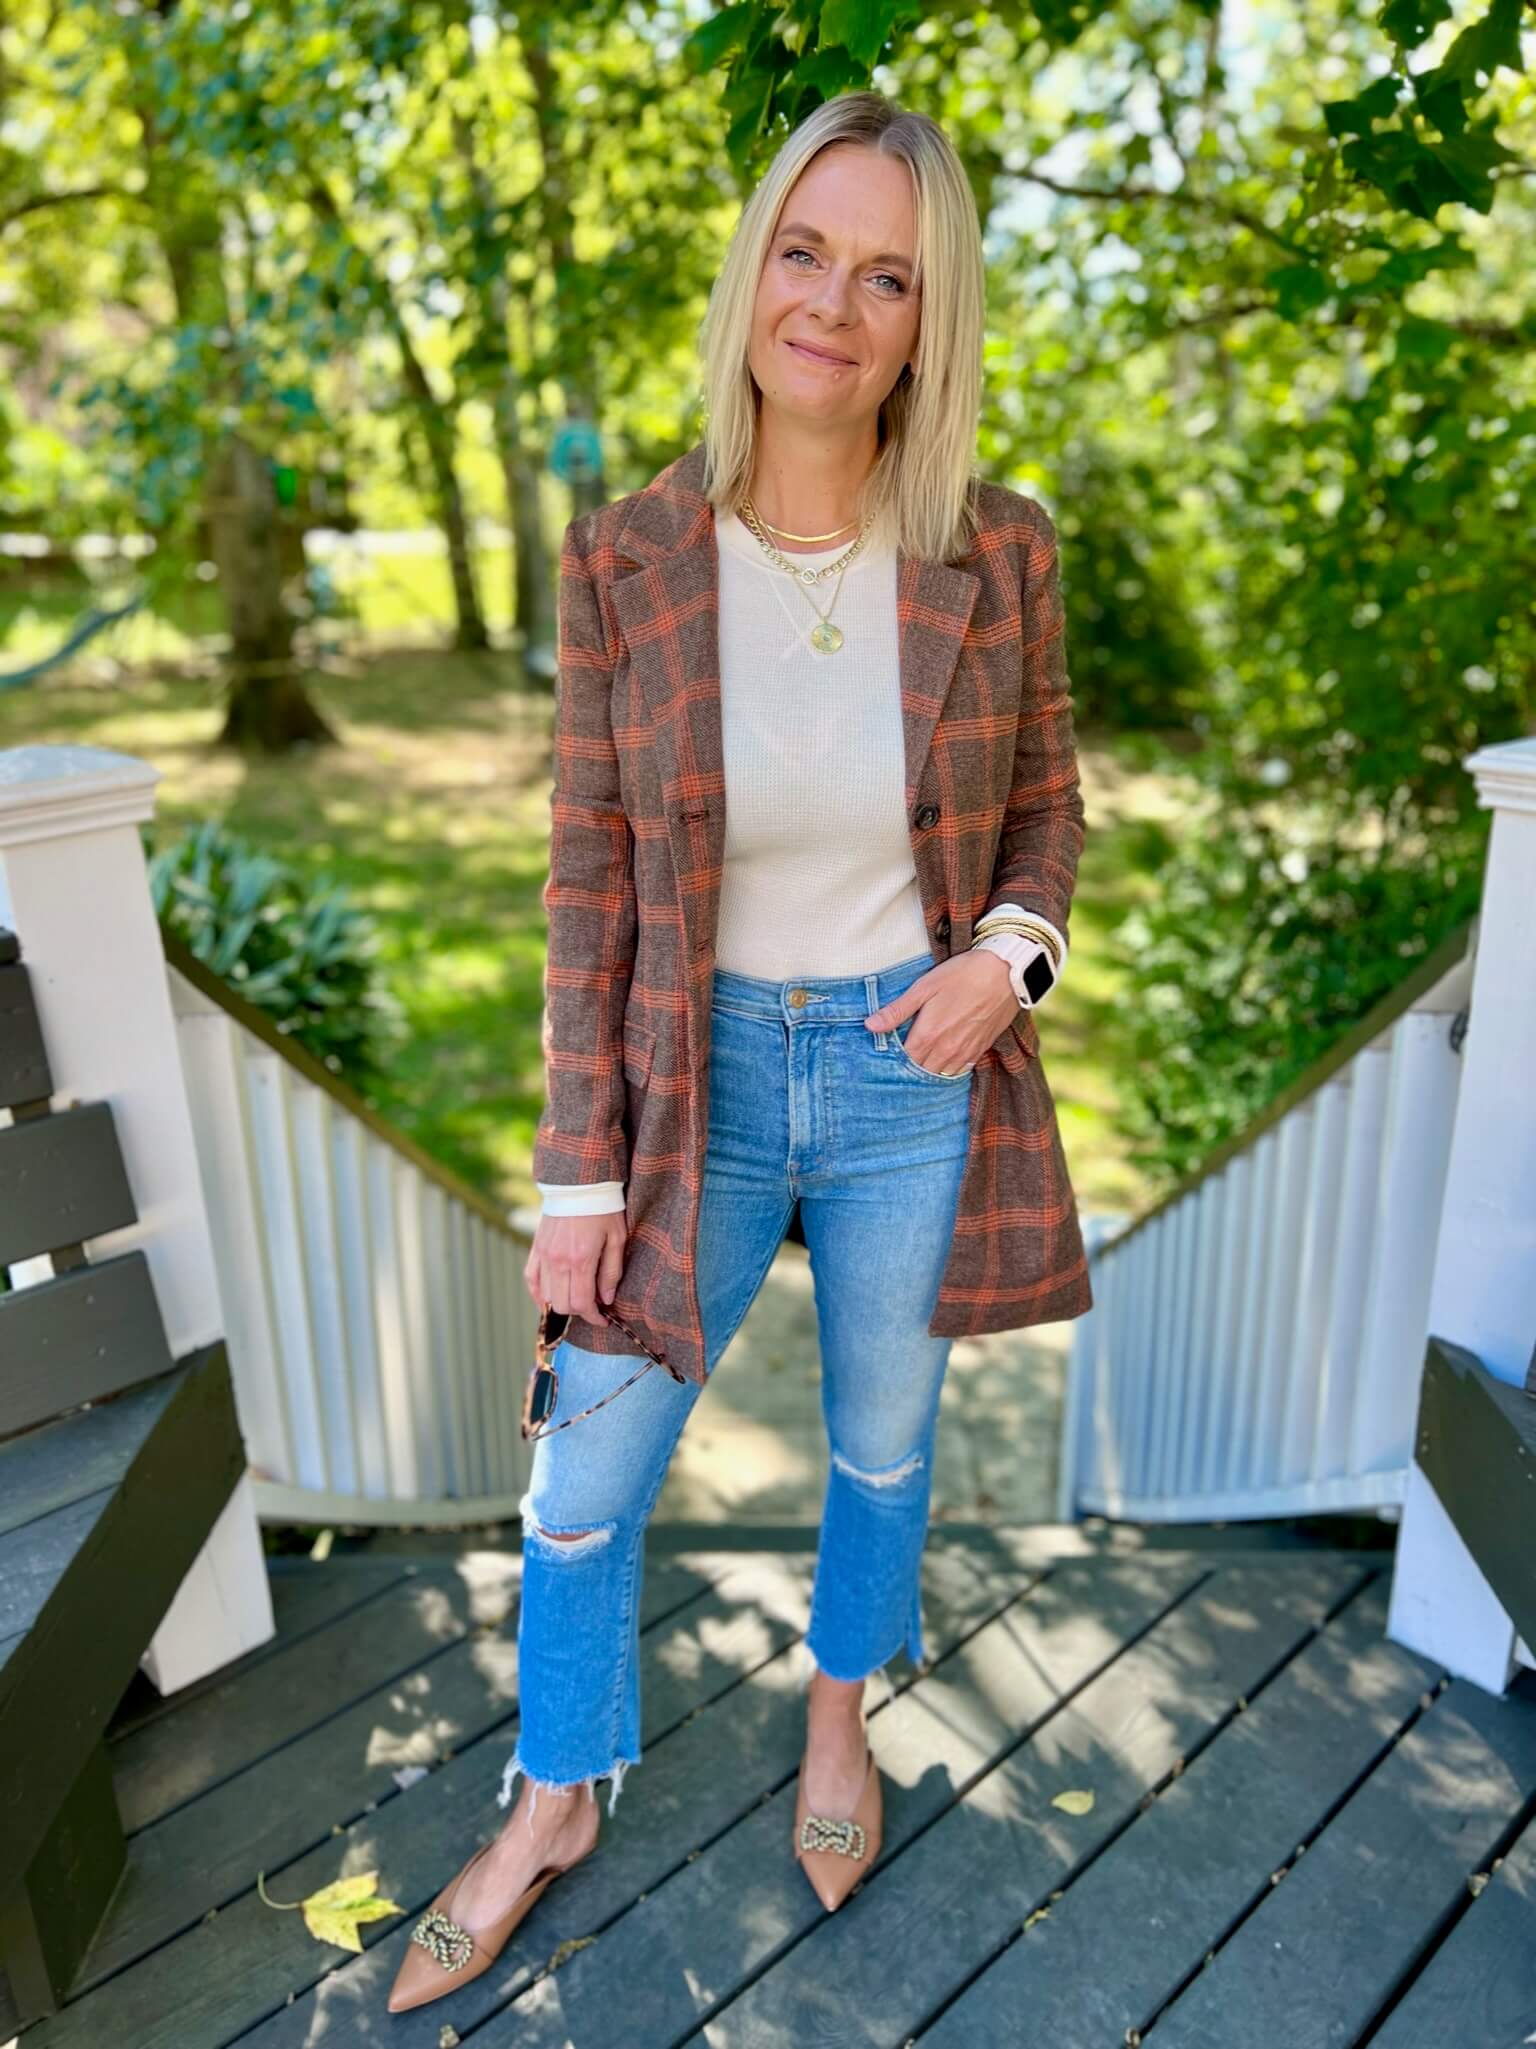 how to wear mules with a blazer how to style a plaid blazer how to wear a blazer casually Nashville stylists share casual blazer look